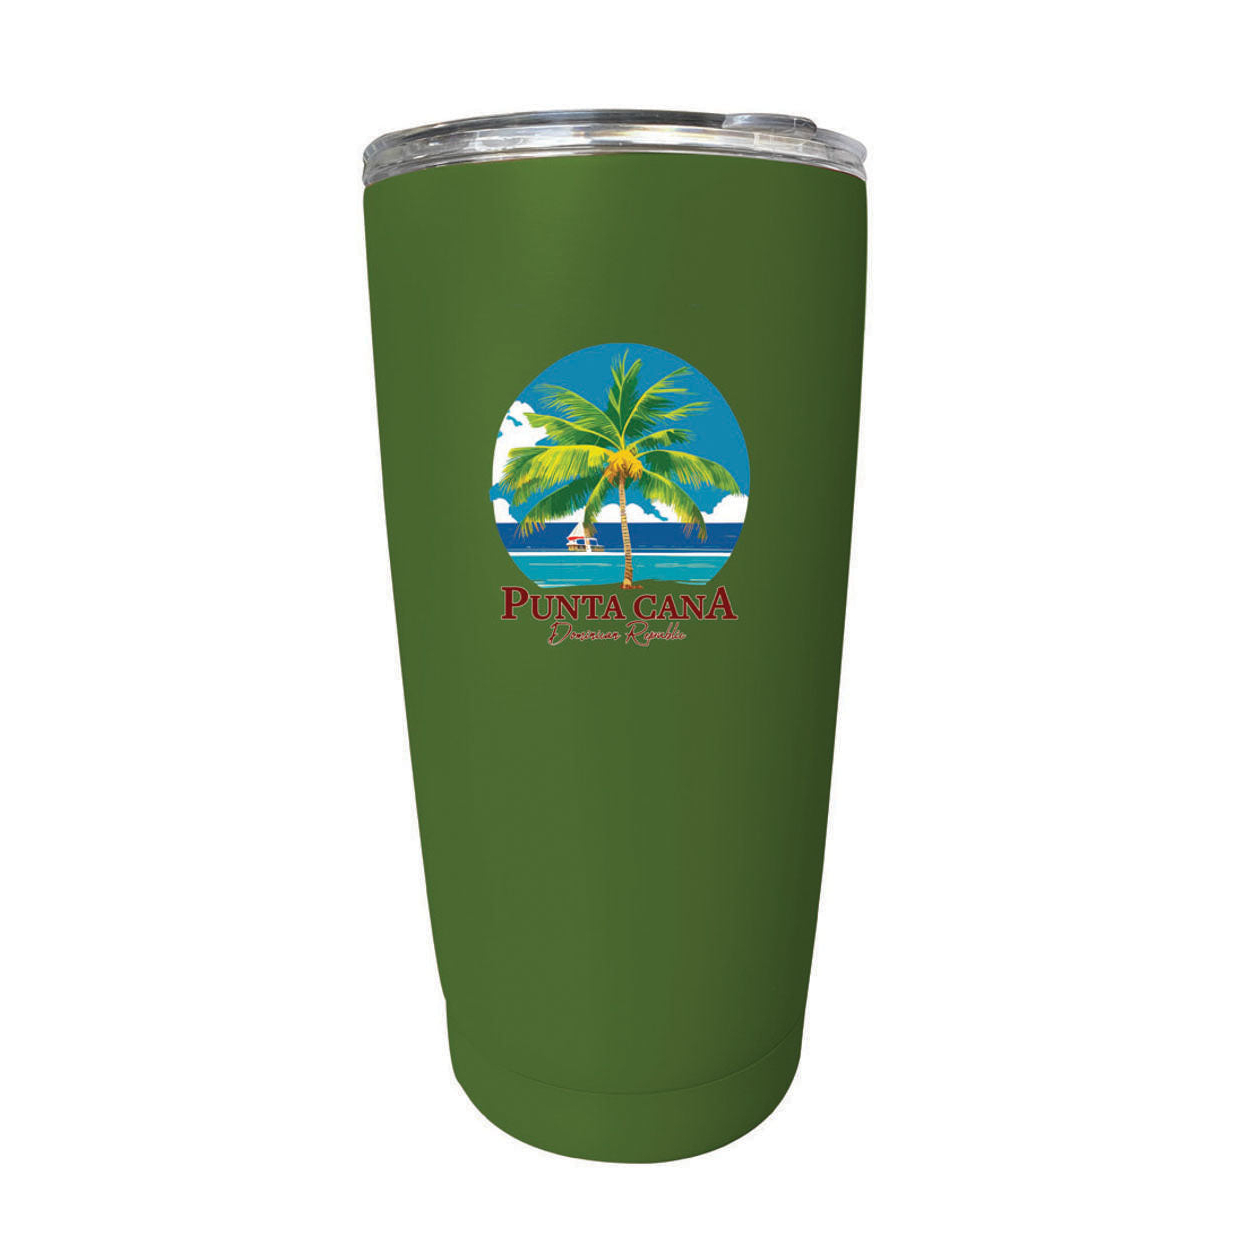 Punta Cana Dominican Republic Souvenir 16 Oz Stainless Steel Insulated Tumbler - White, PALM